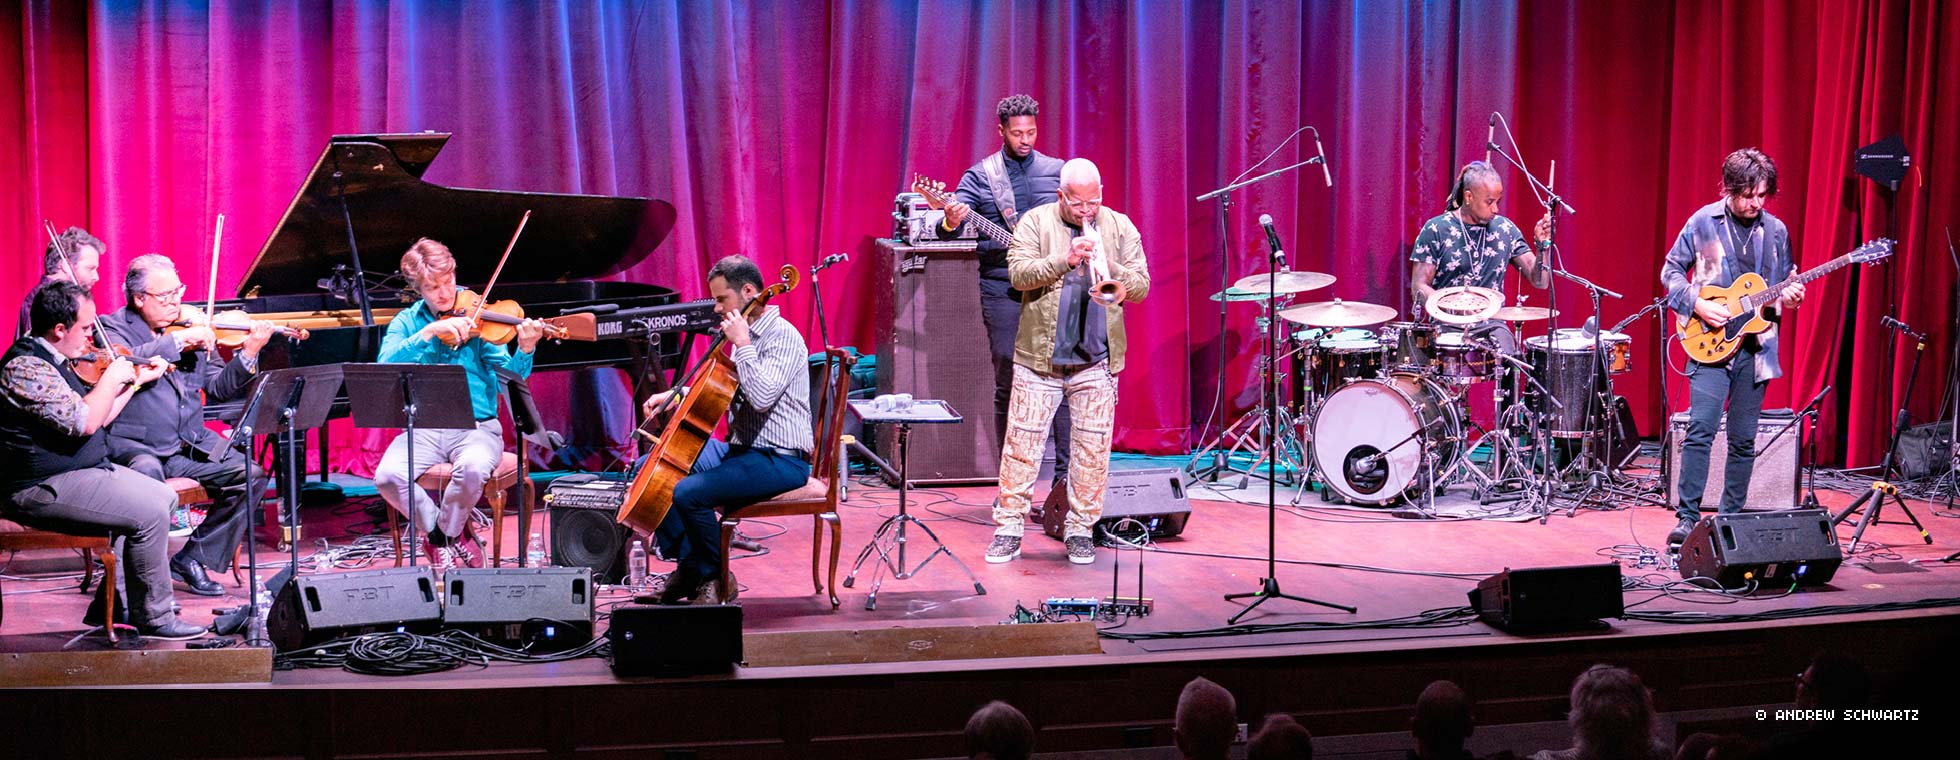 A diverse group of musicians—including a string quartet, electric guitar and synth players, a drummer, a pianist, and a trumpeter, gather together on a stage and perform.